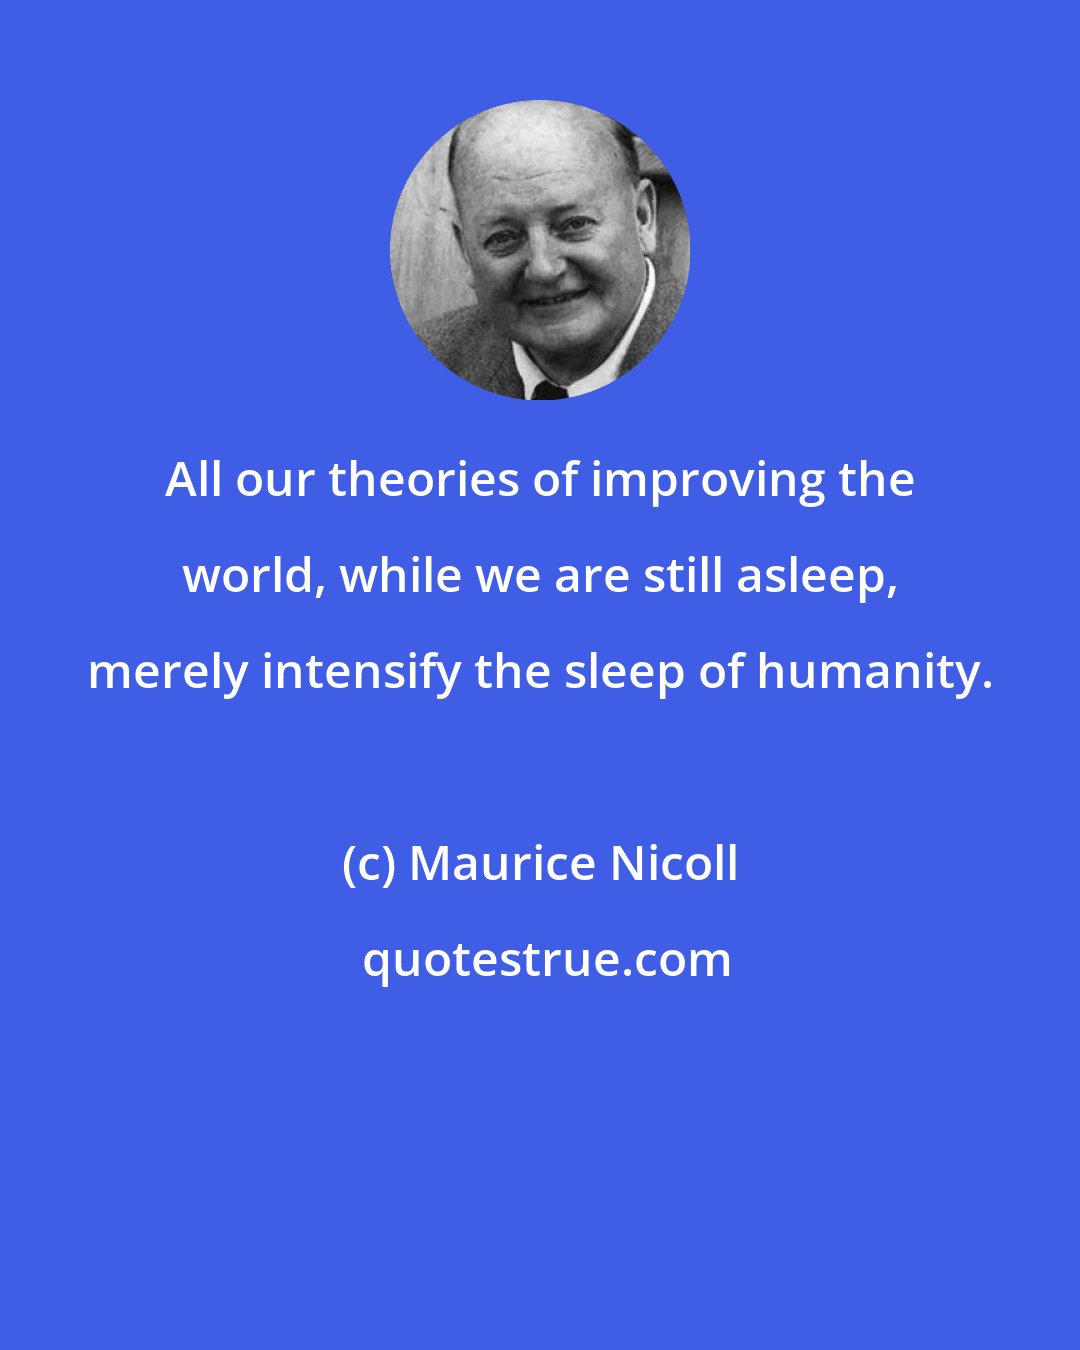 Maurice Nicoll: All our theories of improving the world, while we are still asleep, merely intensify the sleep of humanity.